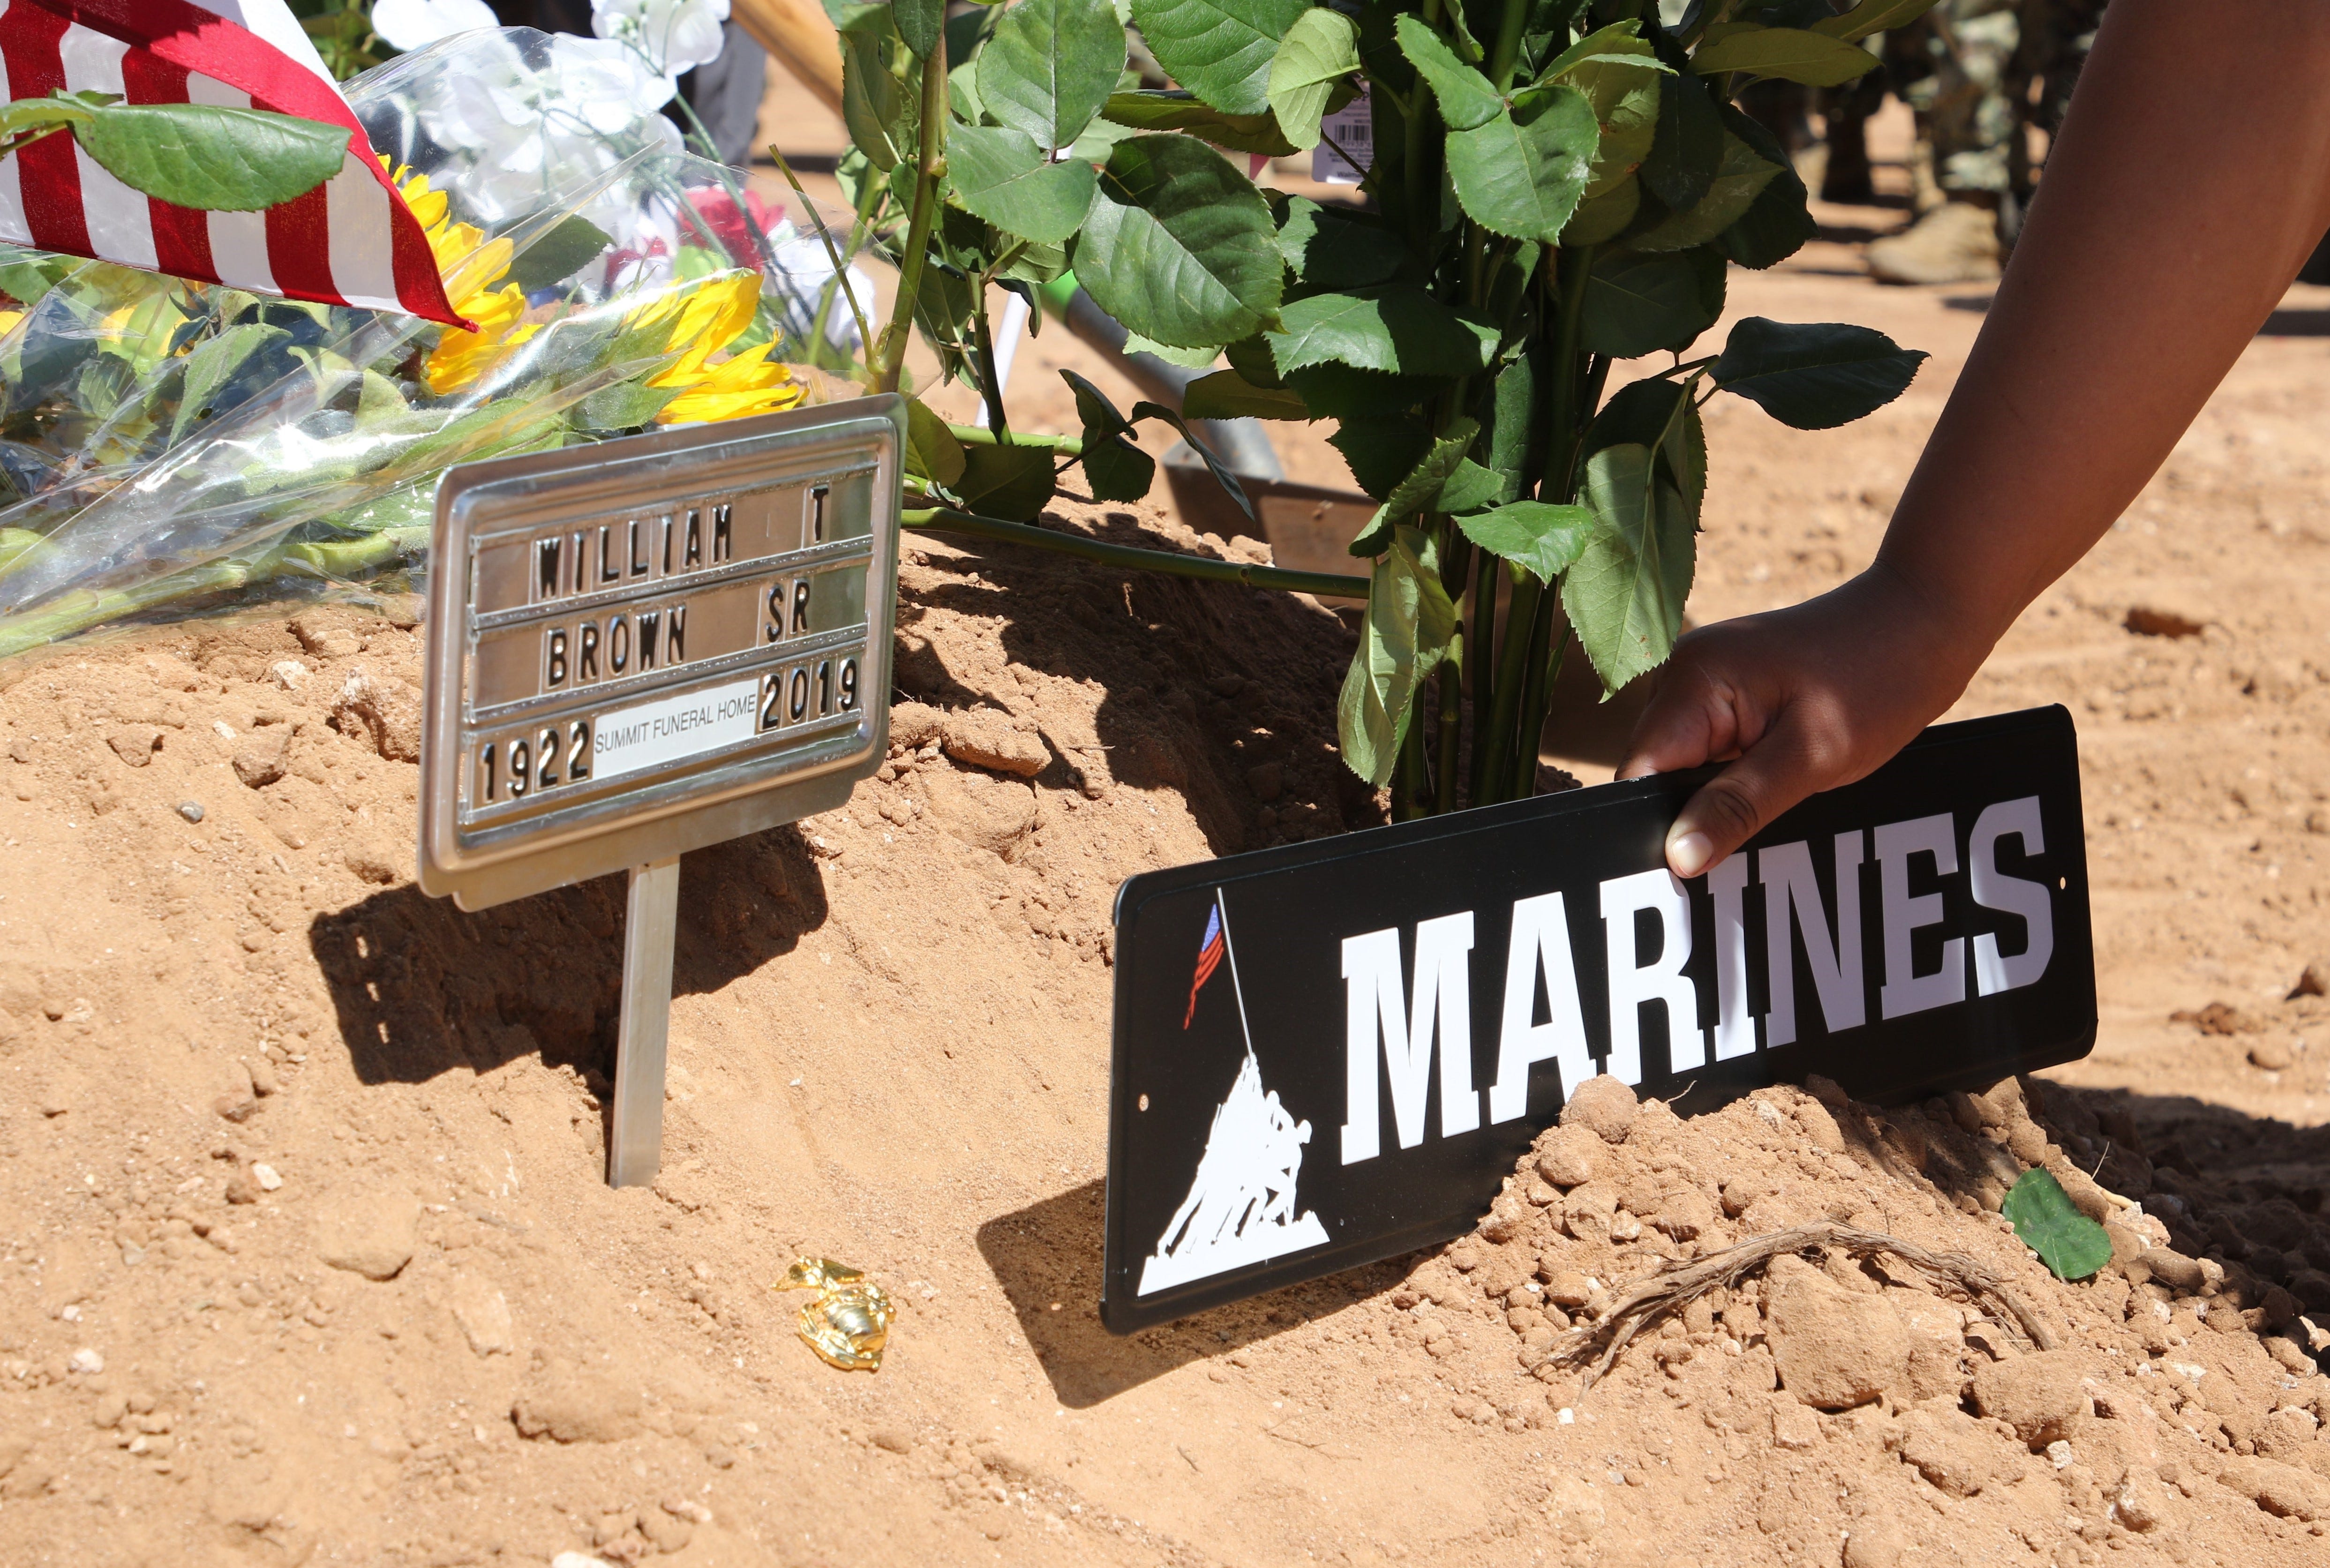 A relative places signage on the grave for Navajo Code Talker William Tully Brown Sr. on June 6 at the Fort Defiance Veterans Cemetery in Fort Defiance, Ariz.